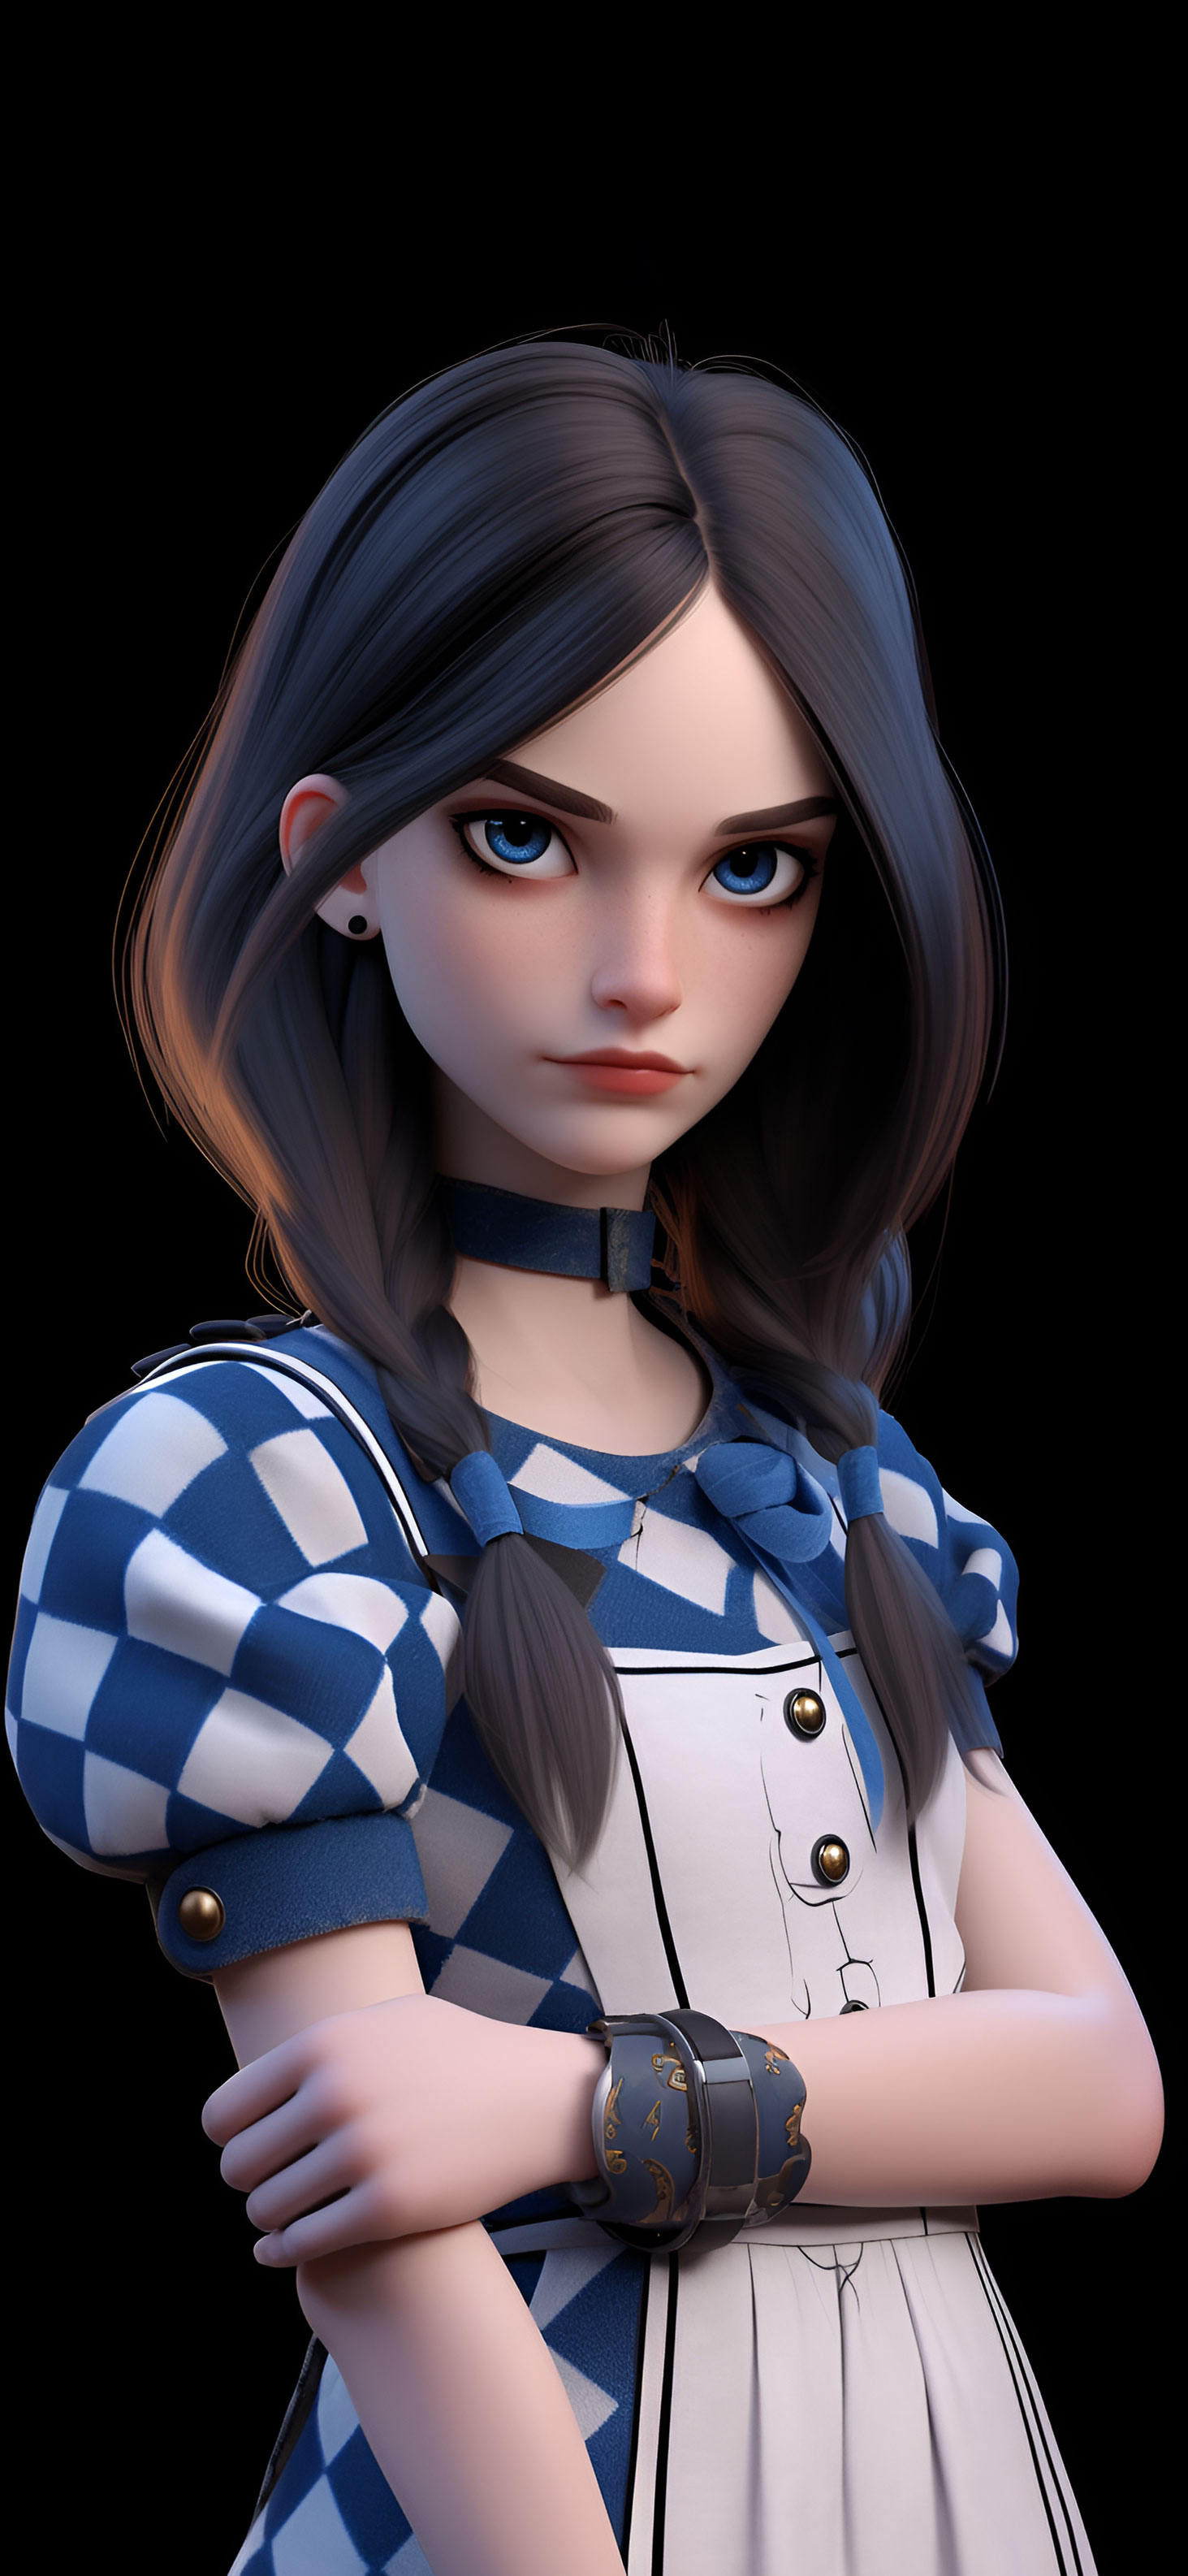 Alice (American McGee's) - American McGee's Alice - Image by